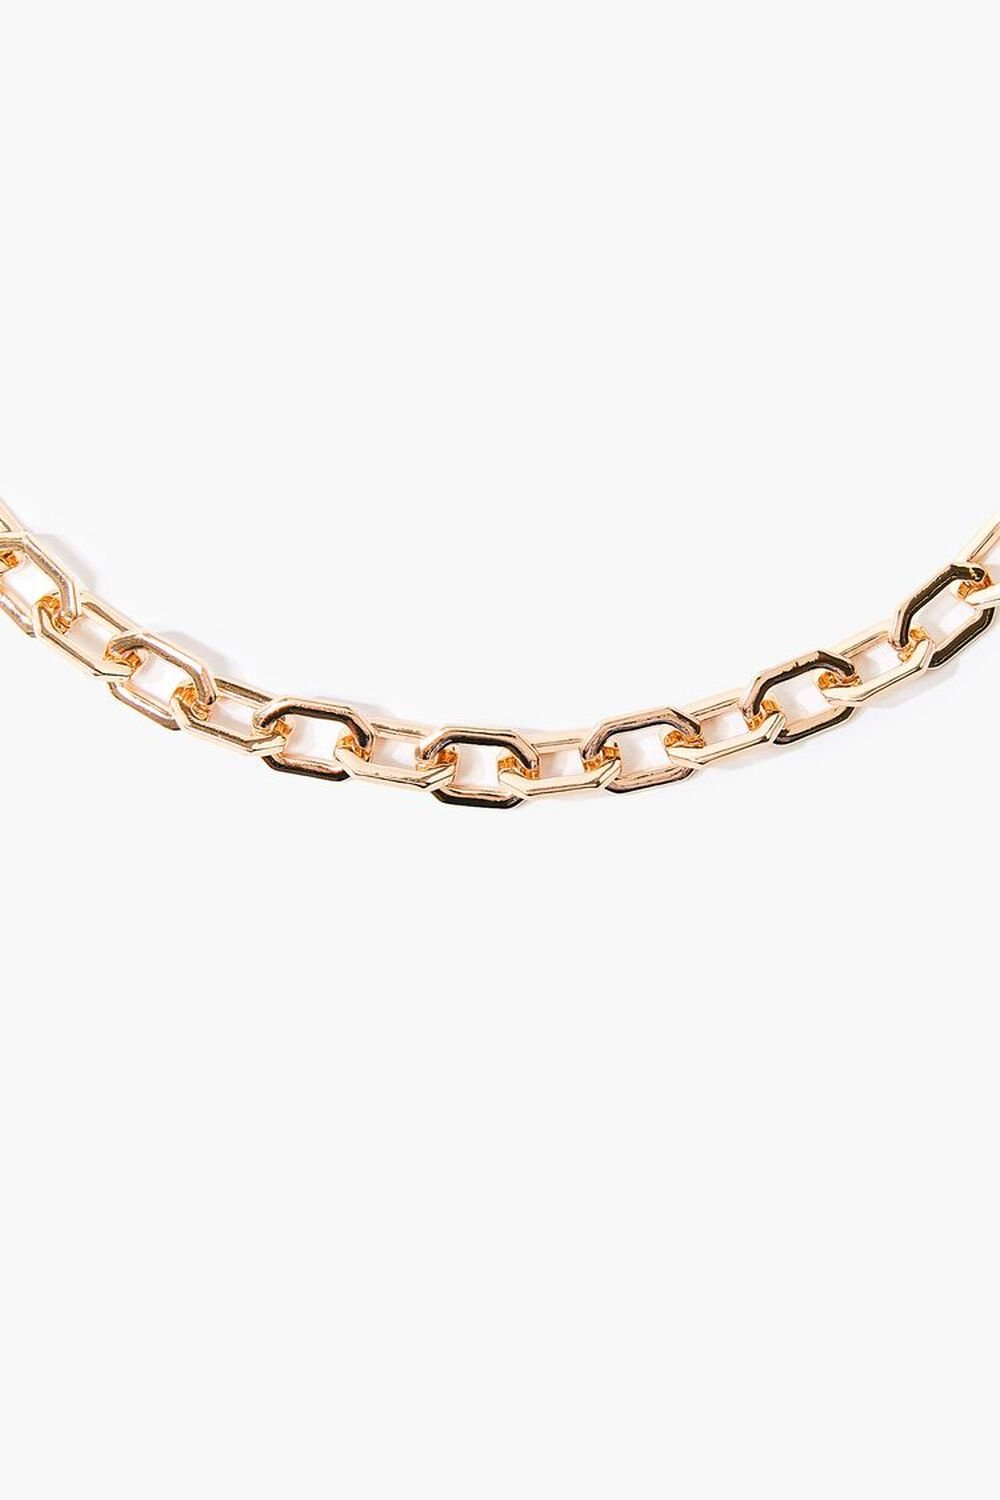 GOLD Anchor Chain Necklace, image 1